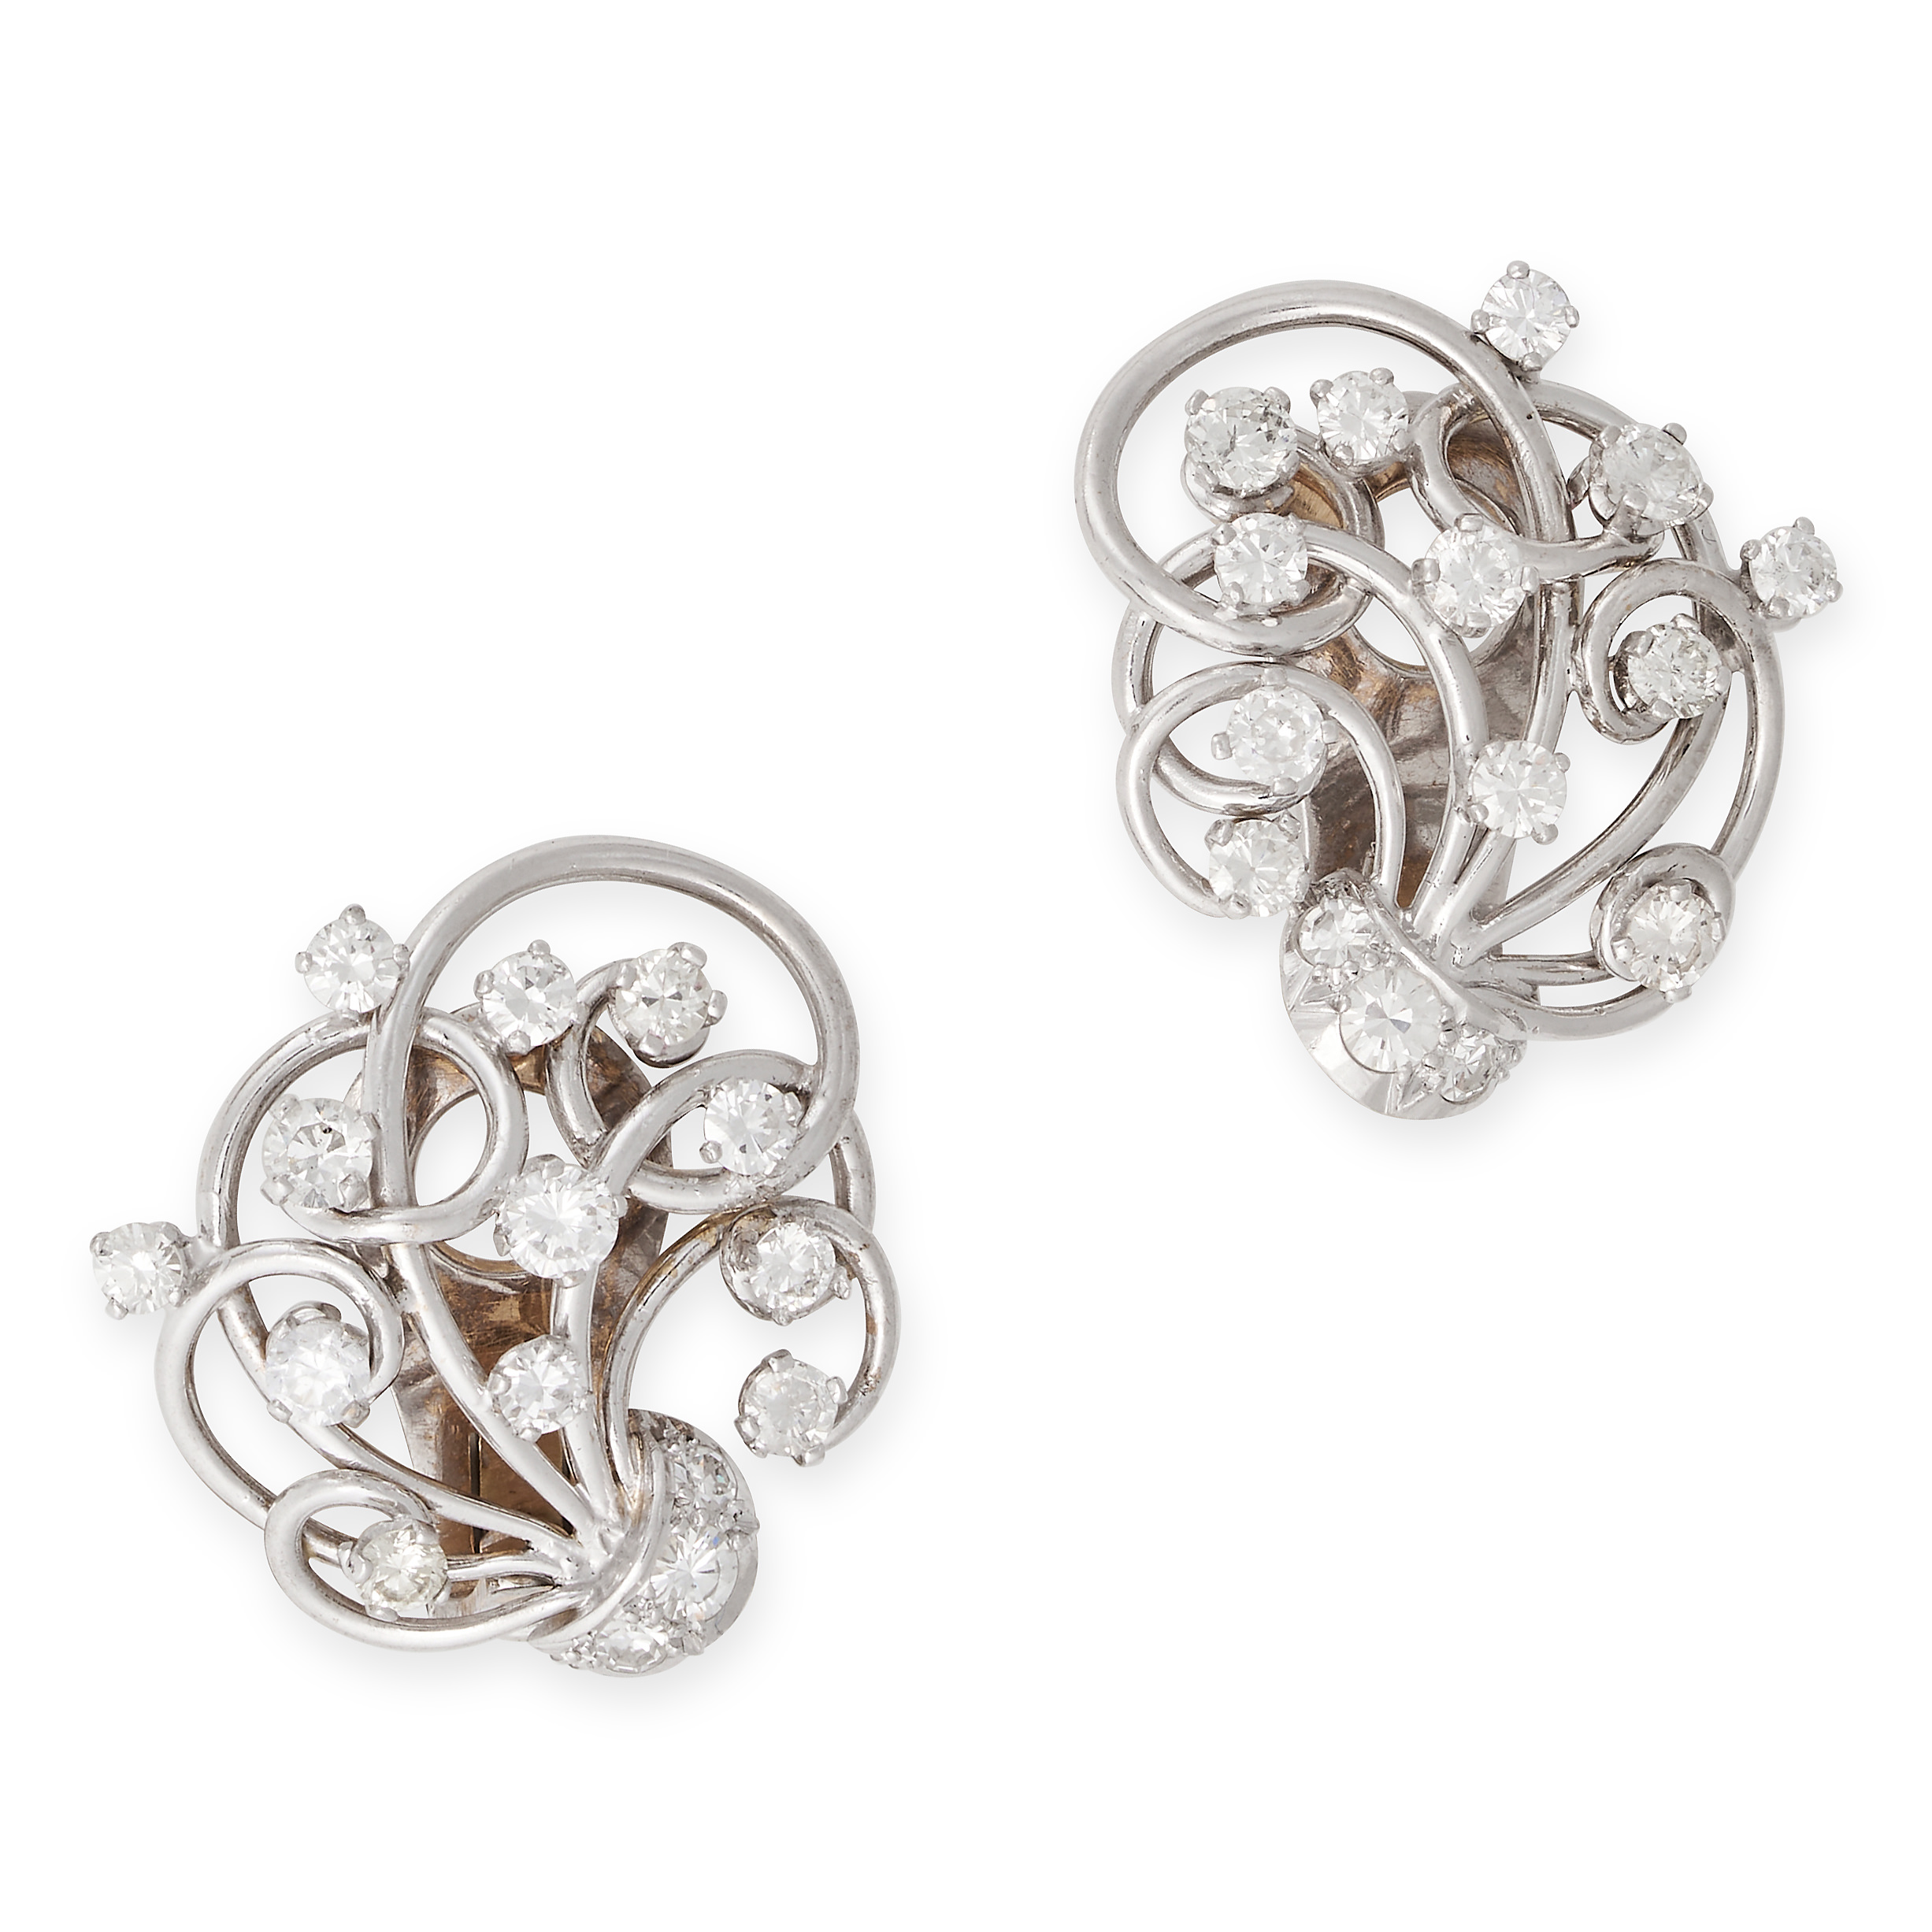 A PAIR OF VINTAGE DIAMOND CLIP EARRINGS in 18ct white gold, the scrolling openwork earrings set t...